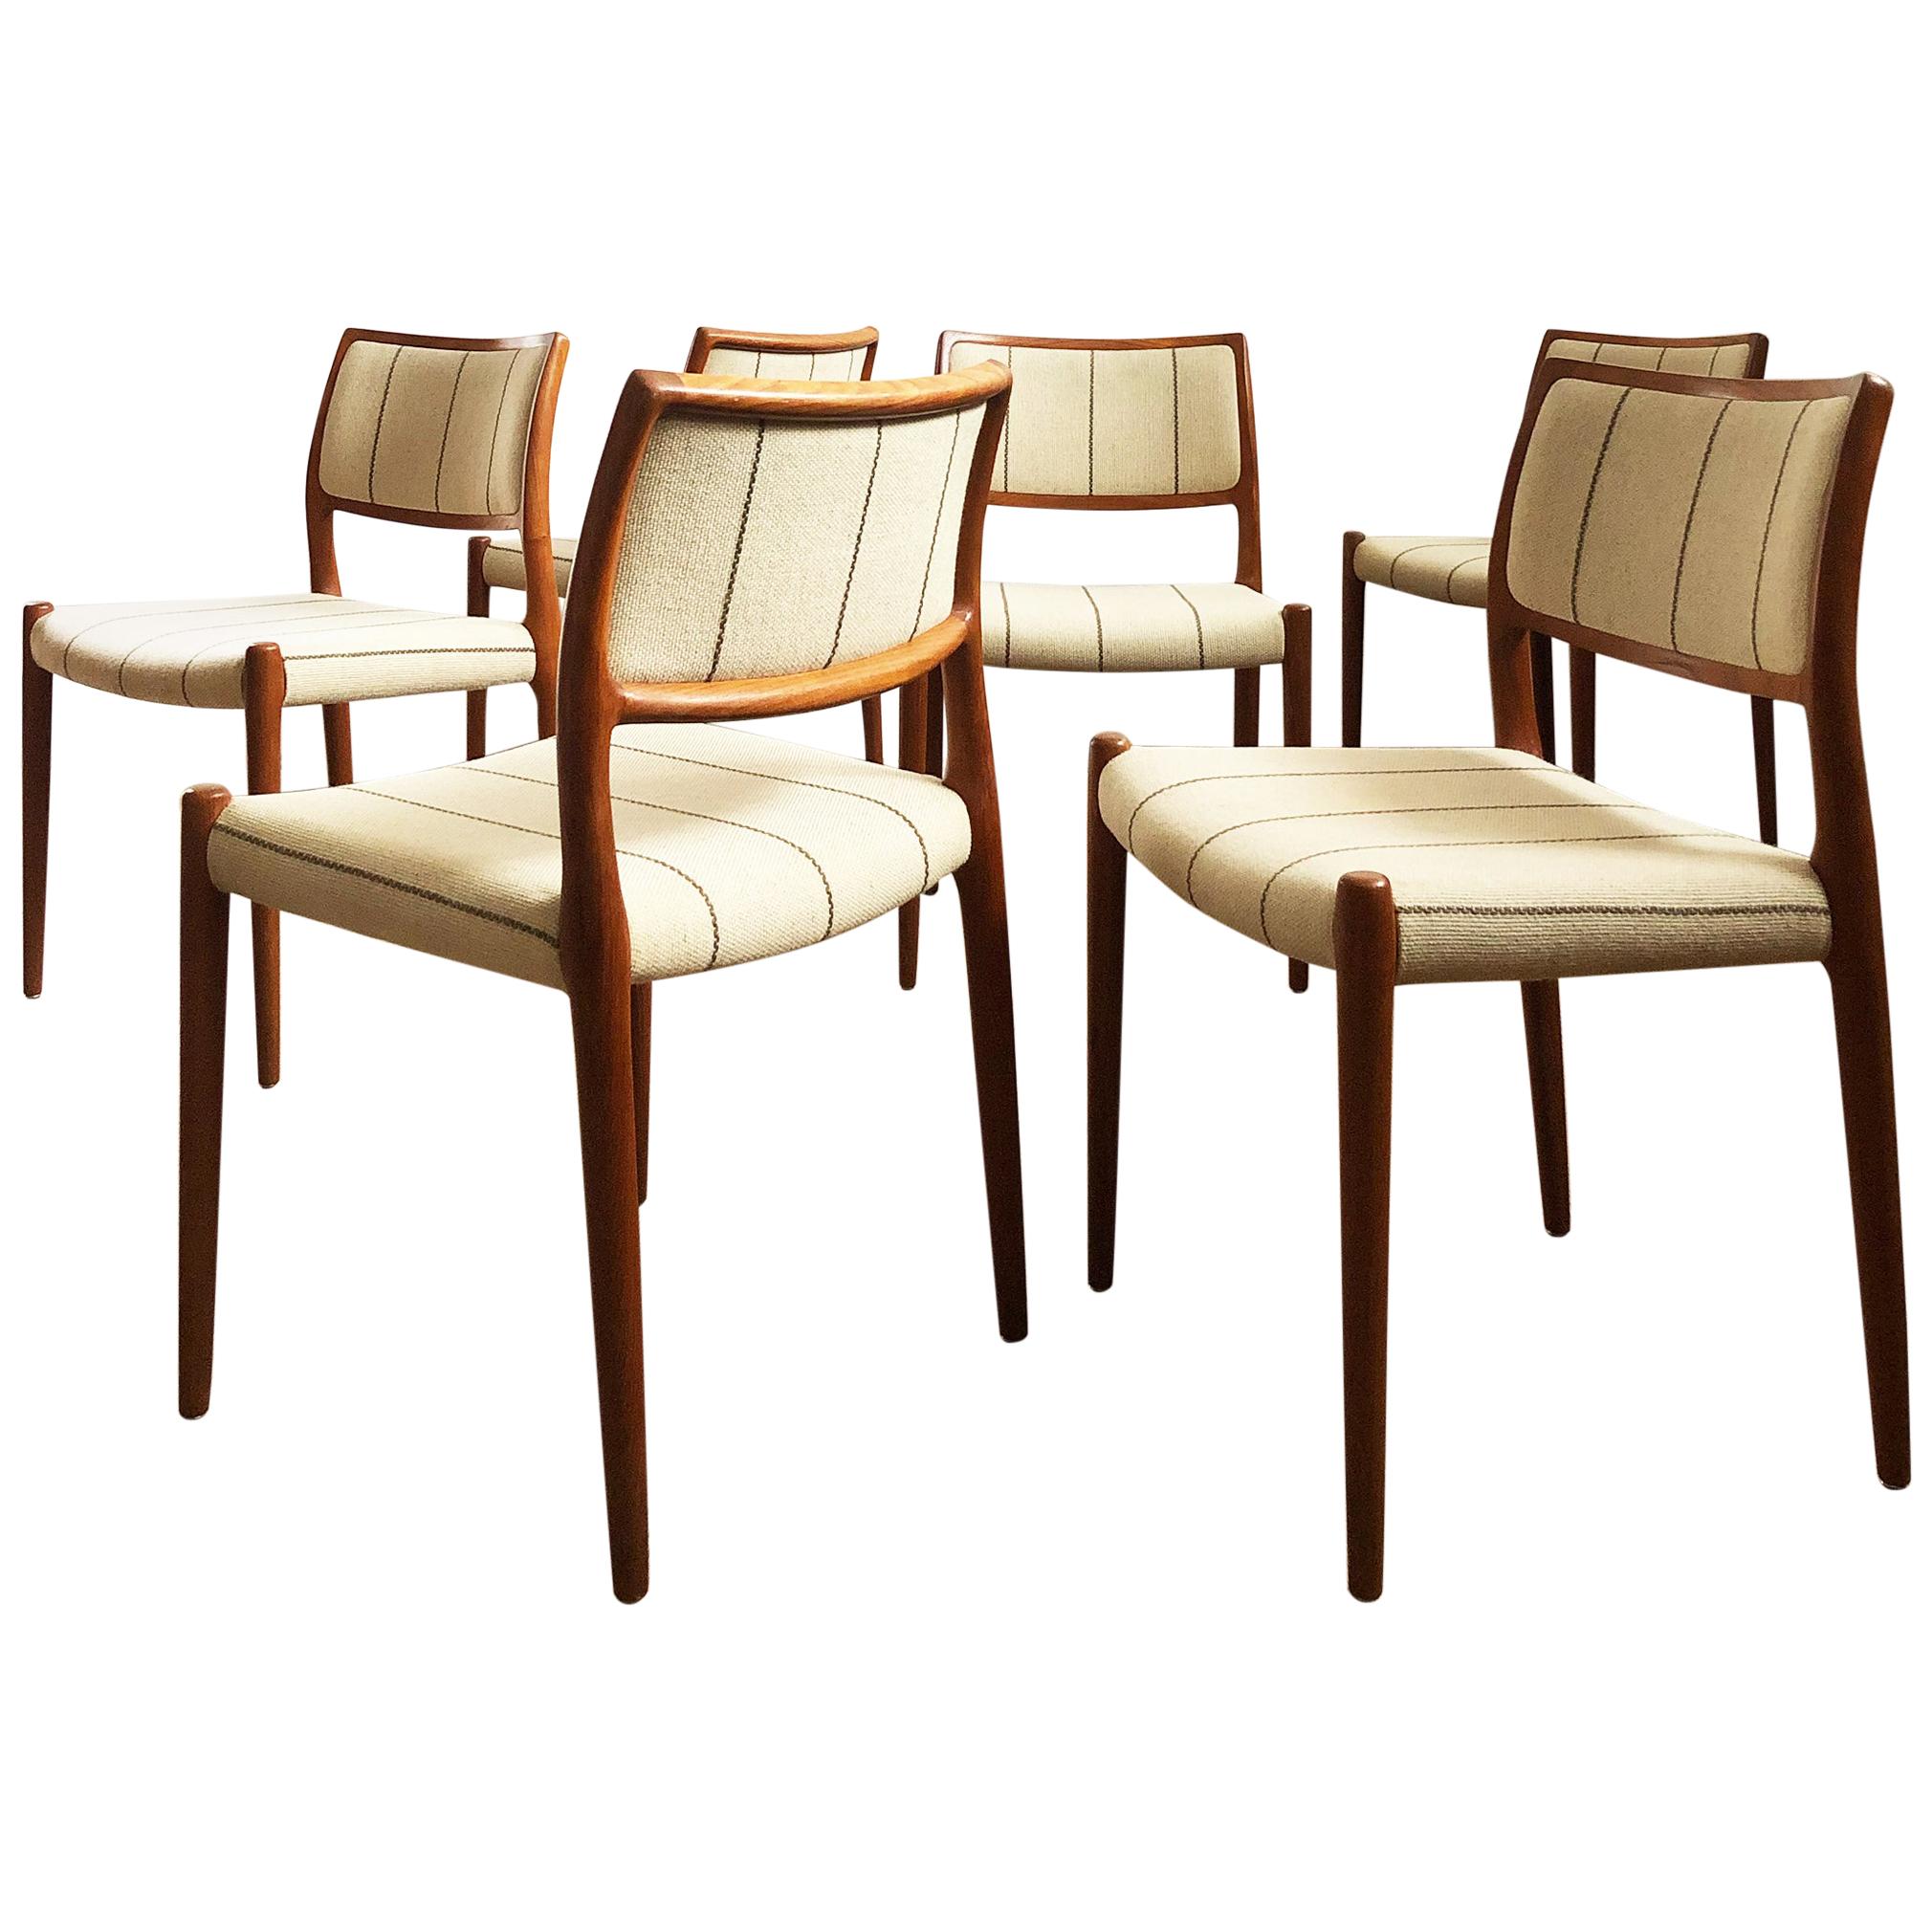 Dining Chairs, Model 80 by Niels O. Møller in Teak and Beige Fabric, Set of 6 For Sale